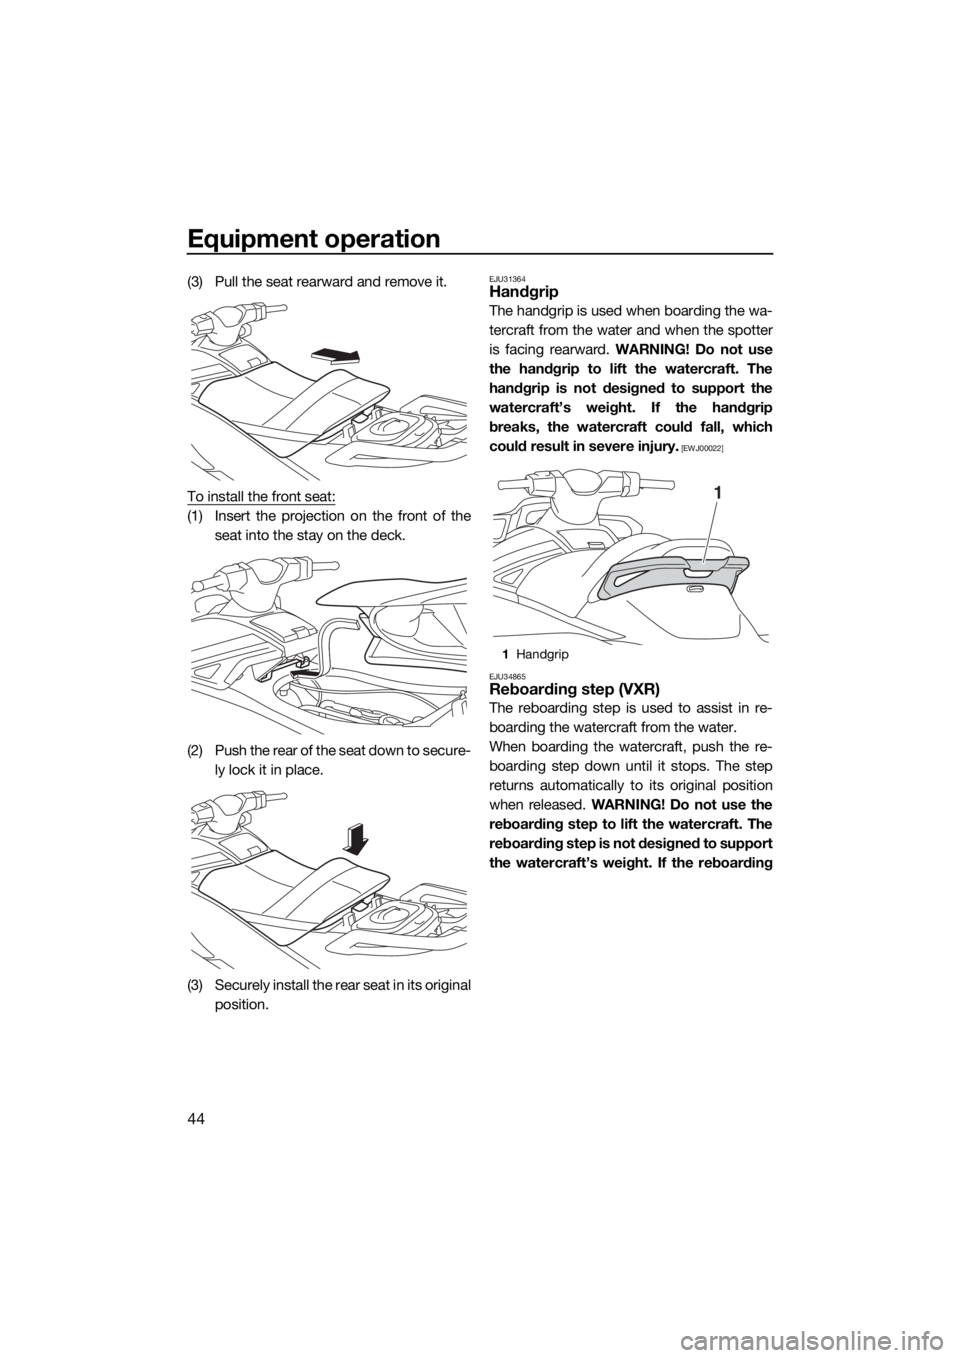 YAMAHA VXR 2015  Owners Manual Equipment operation
44
(3) Pull the seat rearward and remove it.
To install the front seat:
(1) Insert the projection on the front of the
seat into the stay on the deck.
(2) Push the rear of the seat 